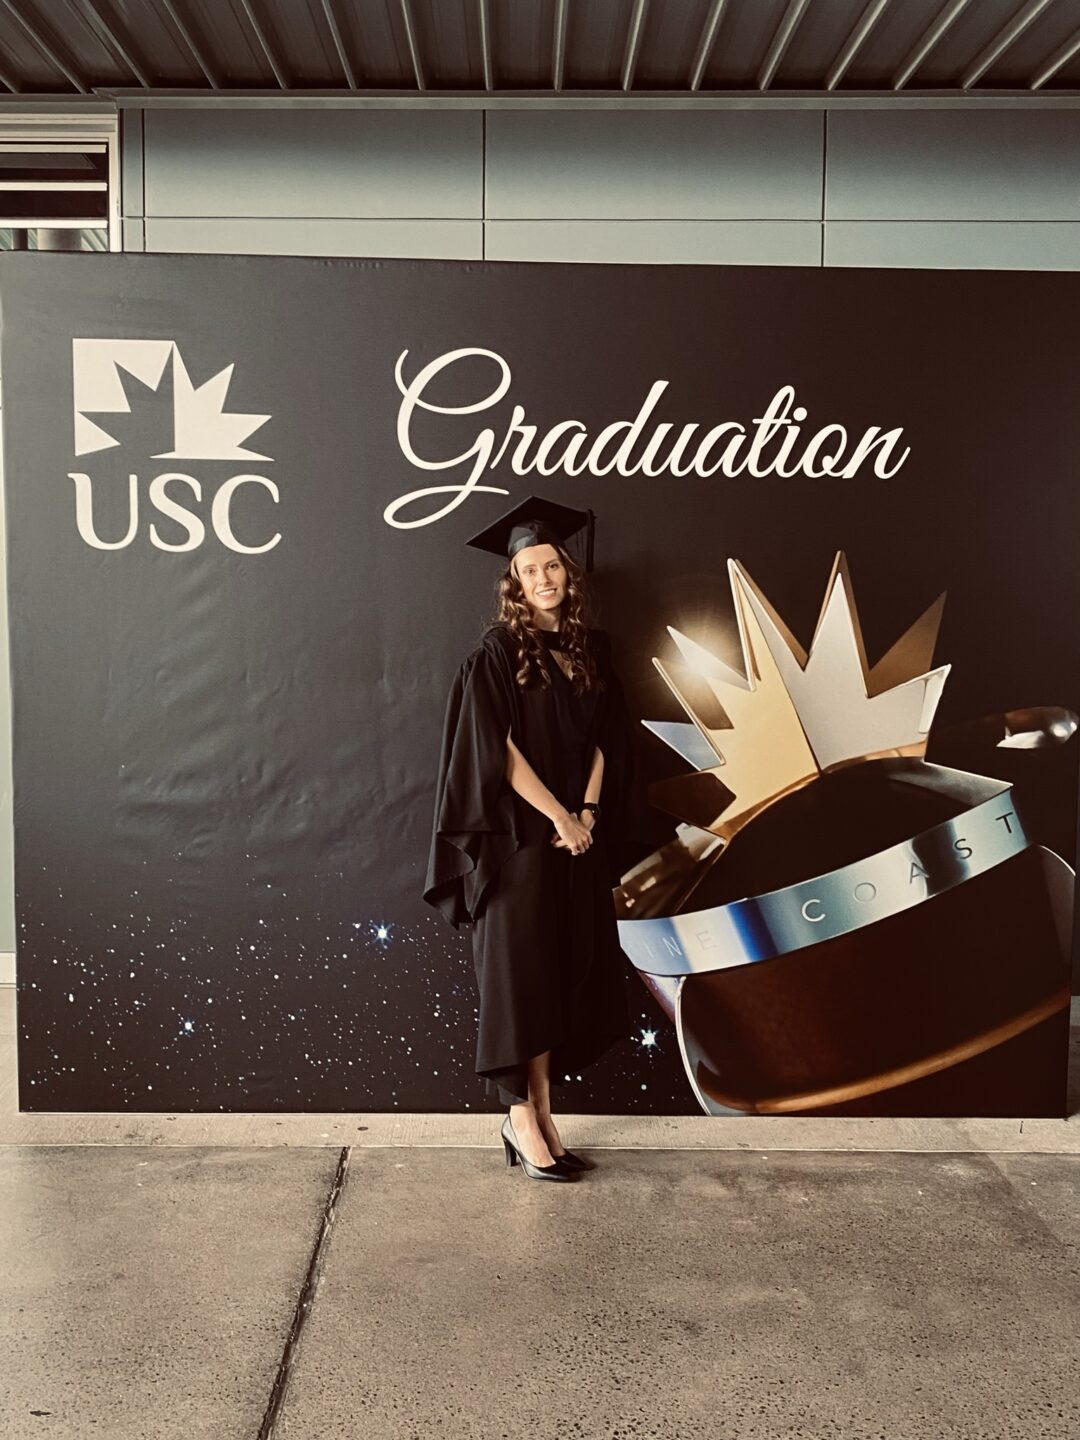 A women with golden brown hair in a black graduation robe stands in from of a sign that says 'Graduation'